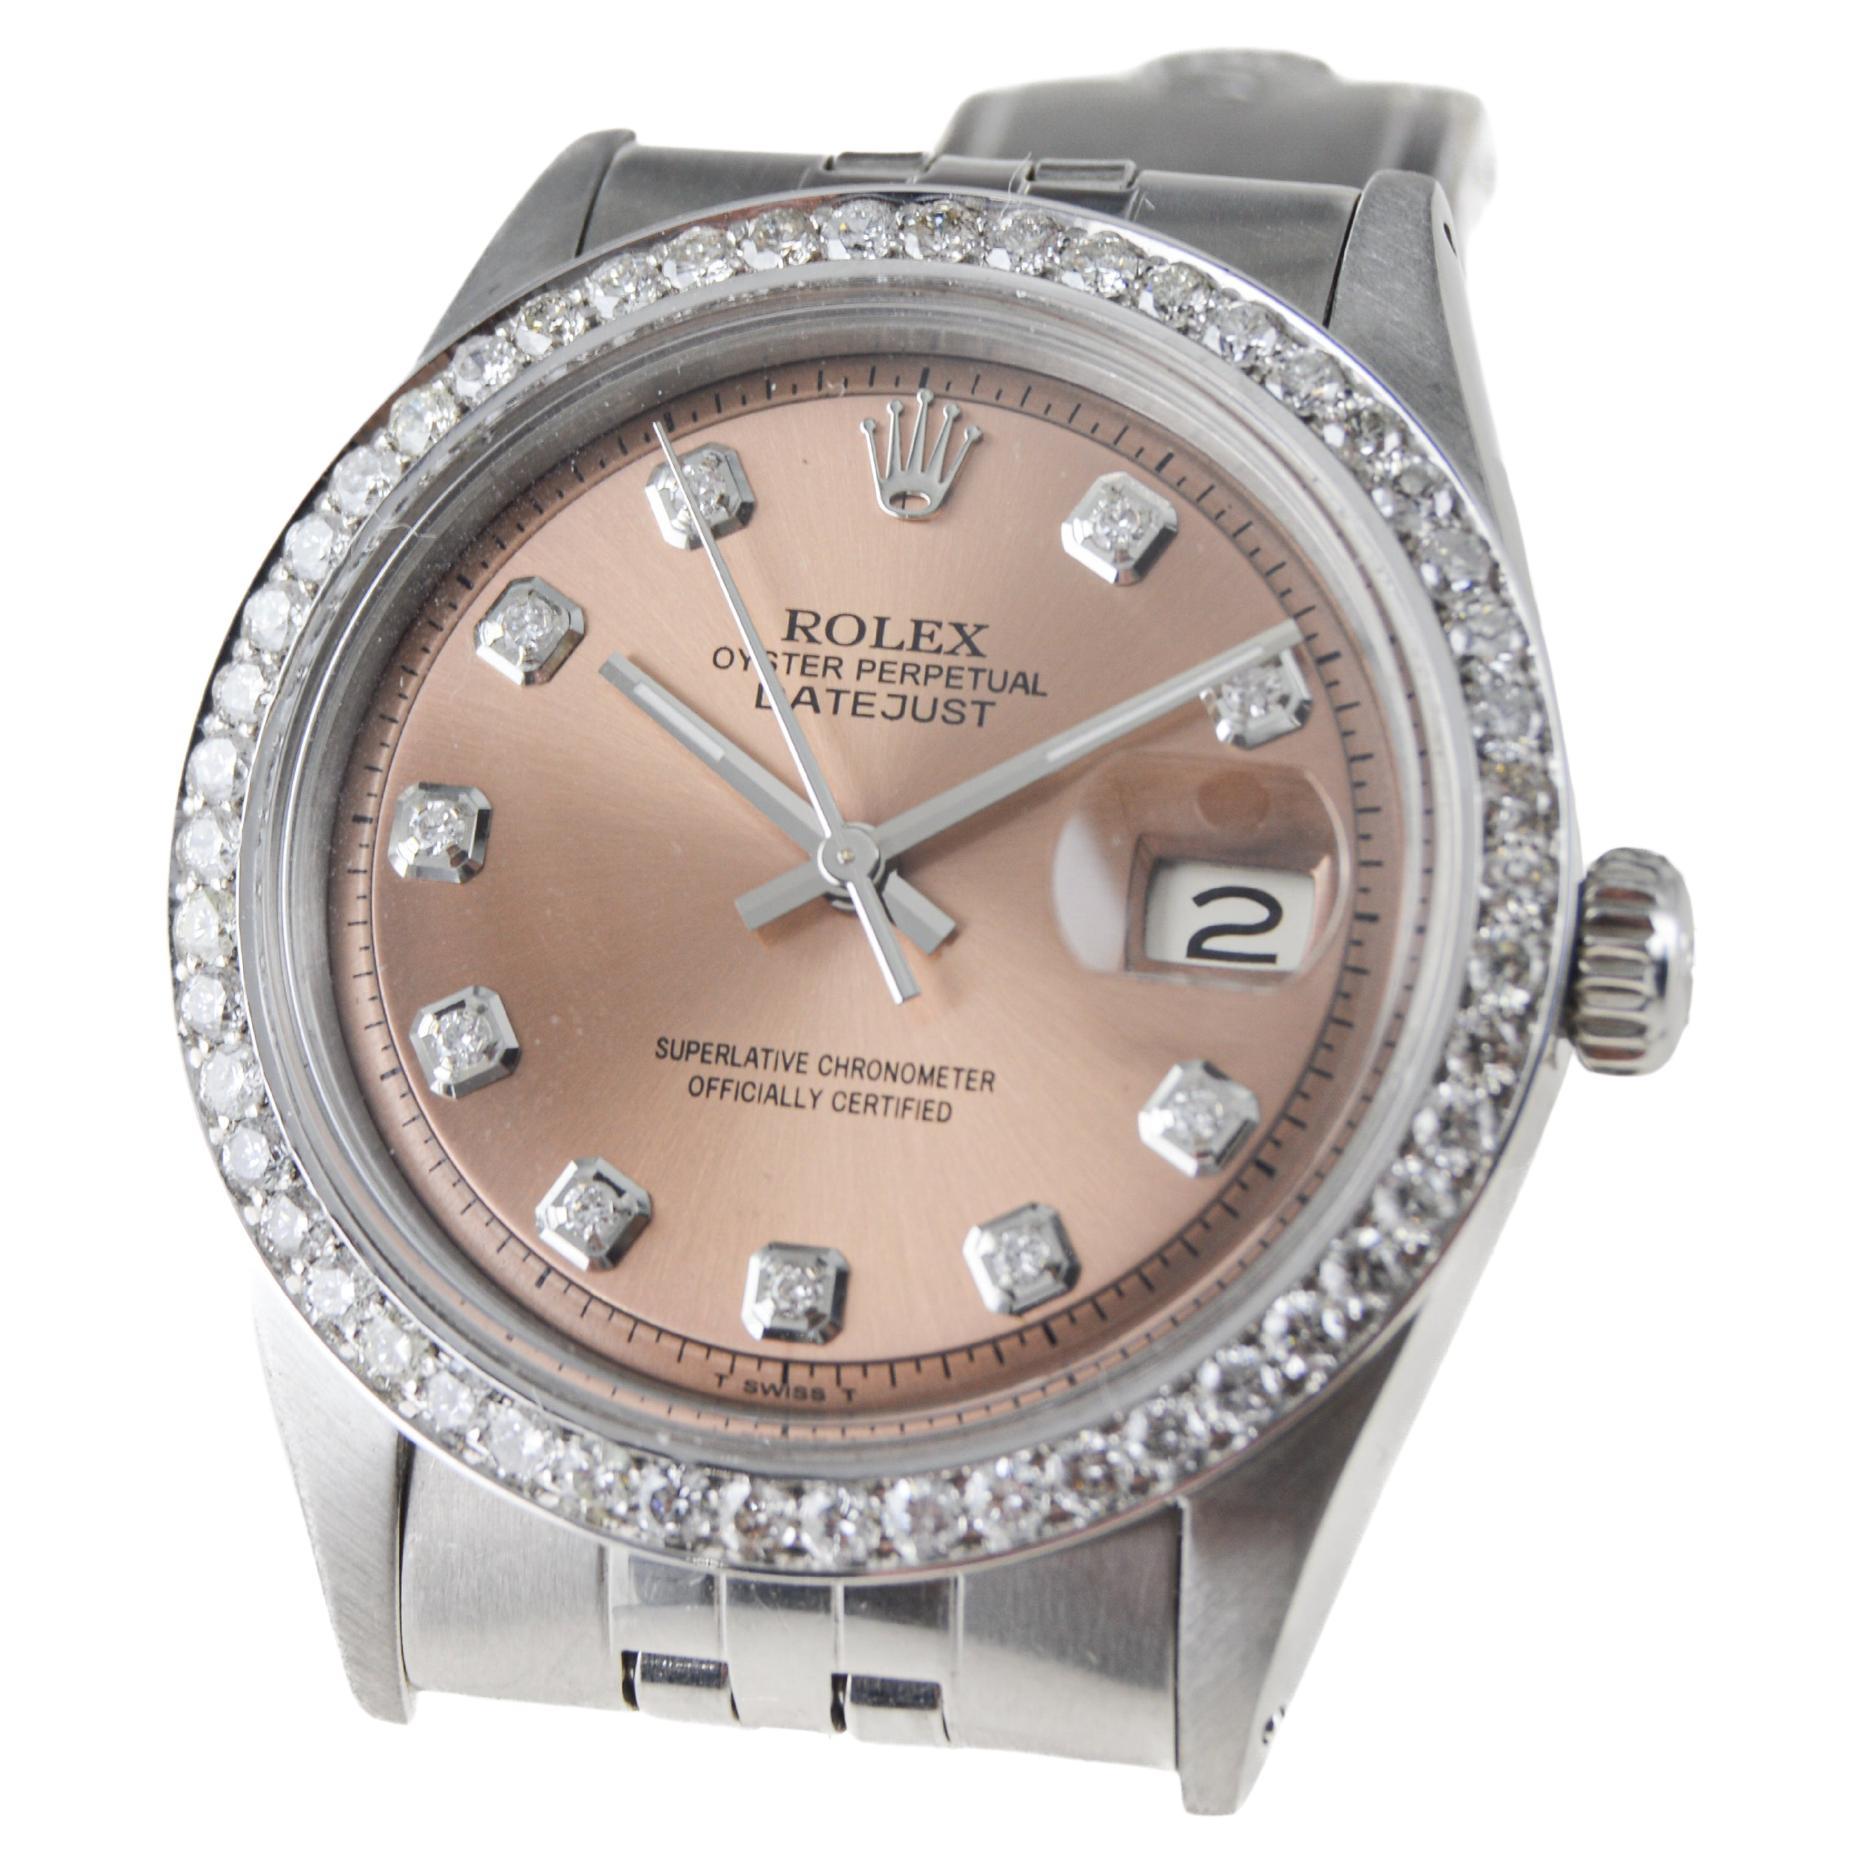 Rolex Stainless Steel Datejust Custom Finished Dial Diamond Bezel, circa 1970's For Sale 1